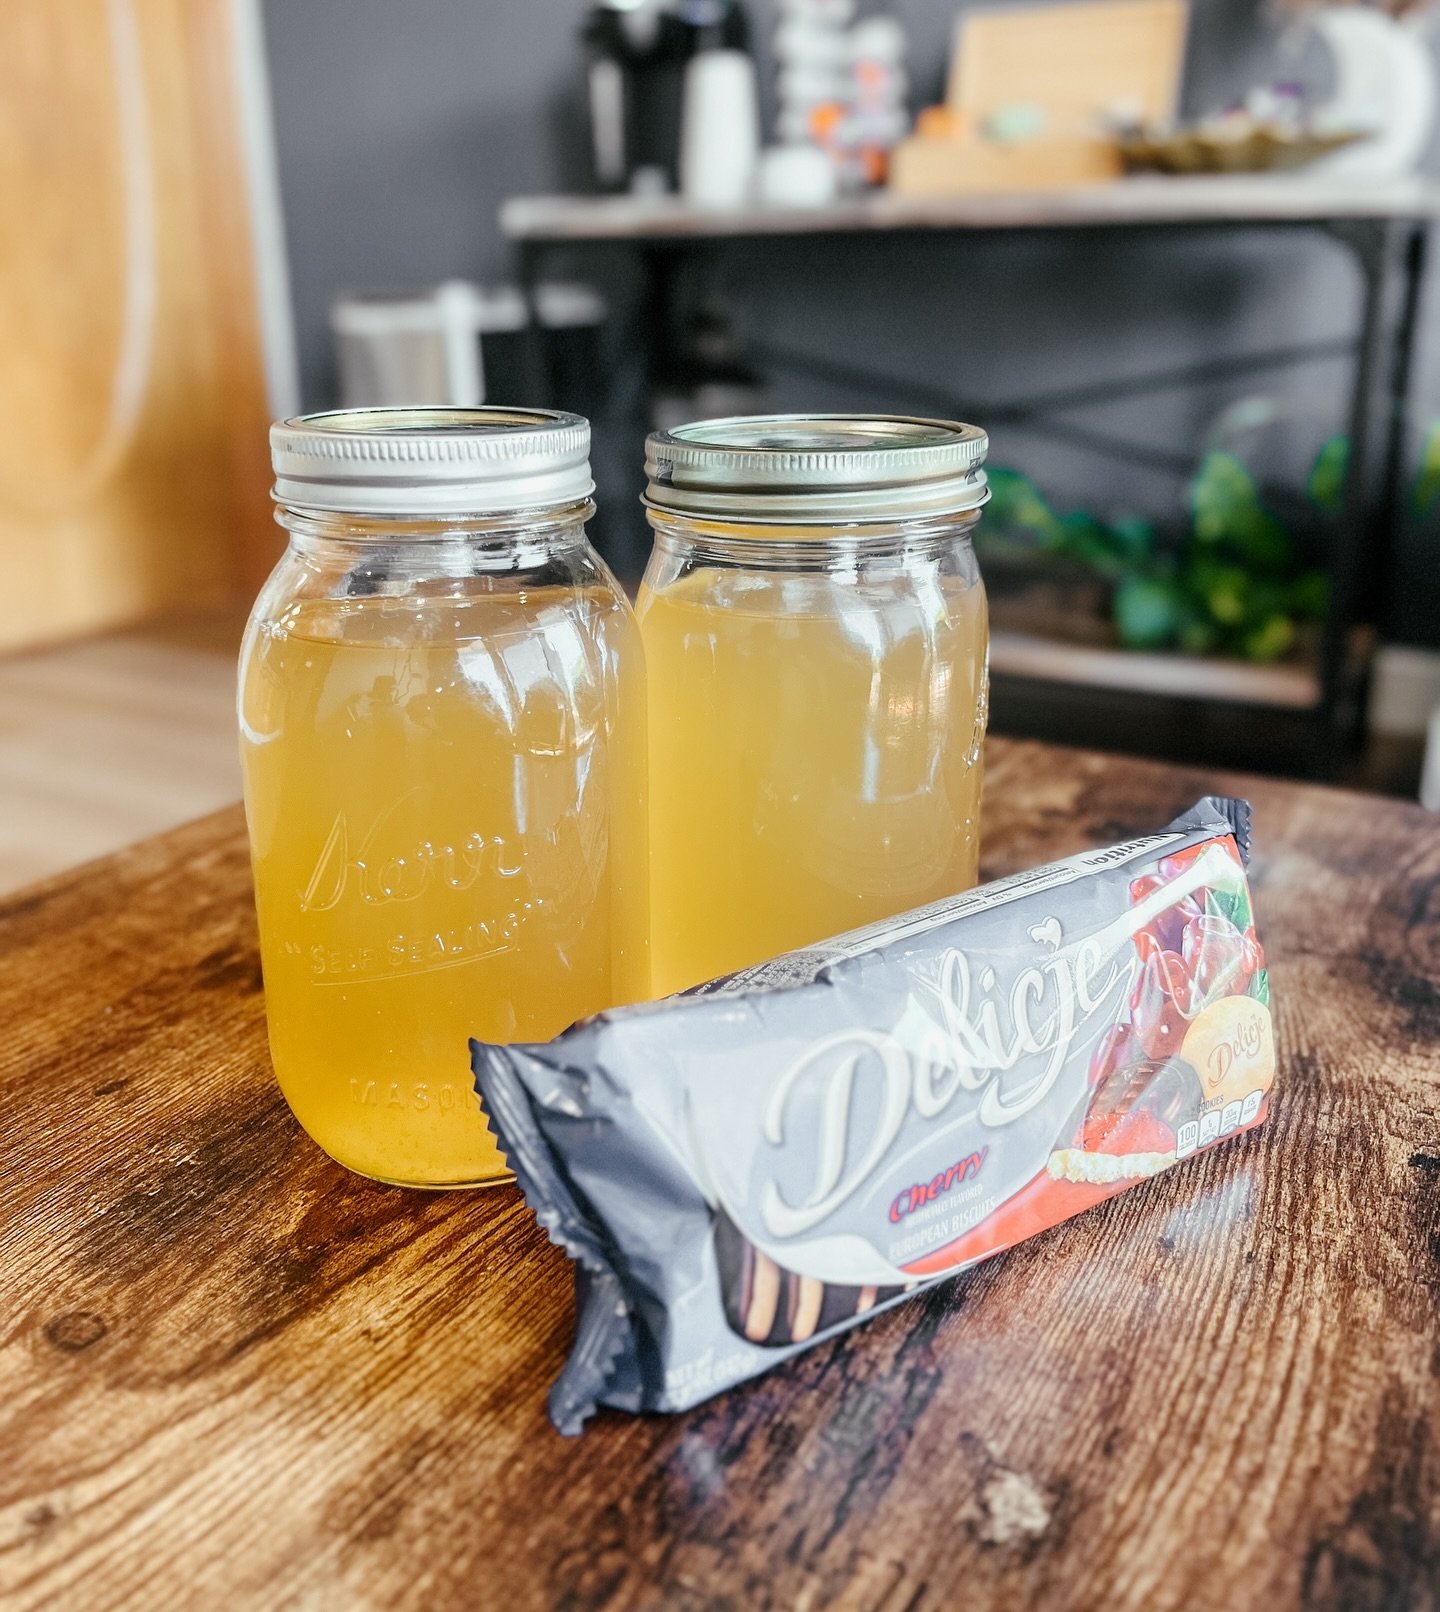 Grateful for our lovely patient gifting us with this refreshing (homemade!!) kombucha &amp; delicious cookies to enjoy on a sunny day like today! 🤍✨

We love, and are always thankful for, creating bonds with our patients that go beyond the dental ca